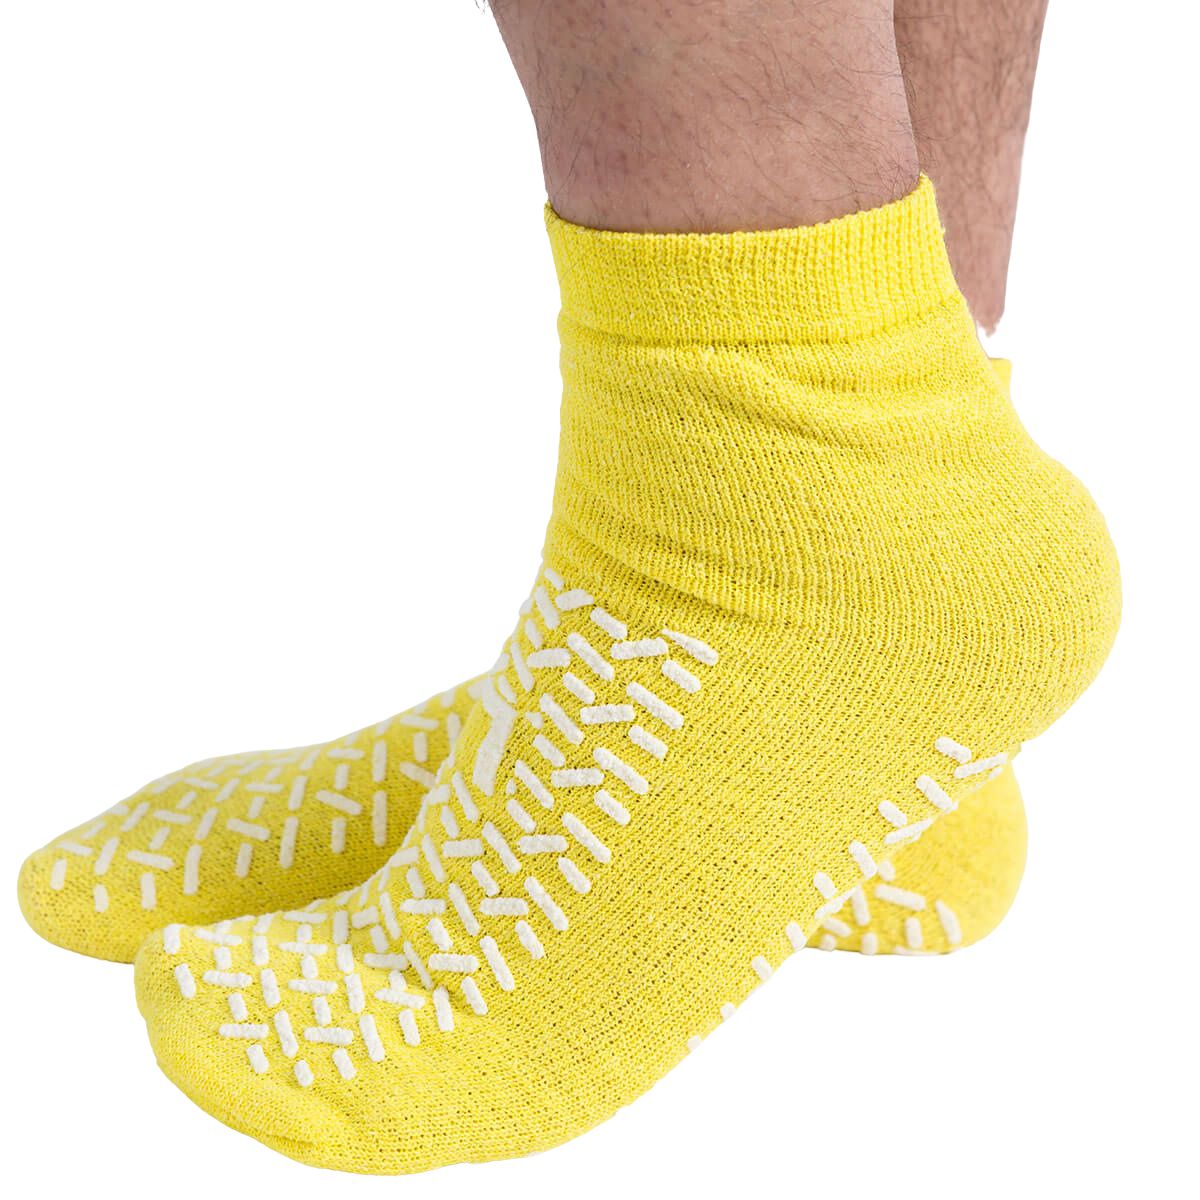 Understand Why Non-Slip Hospital Socks are Importance – Dr. Socko